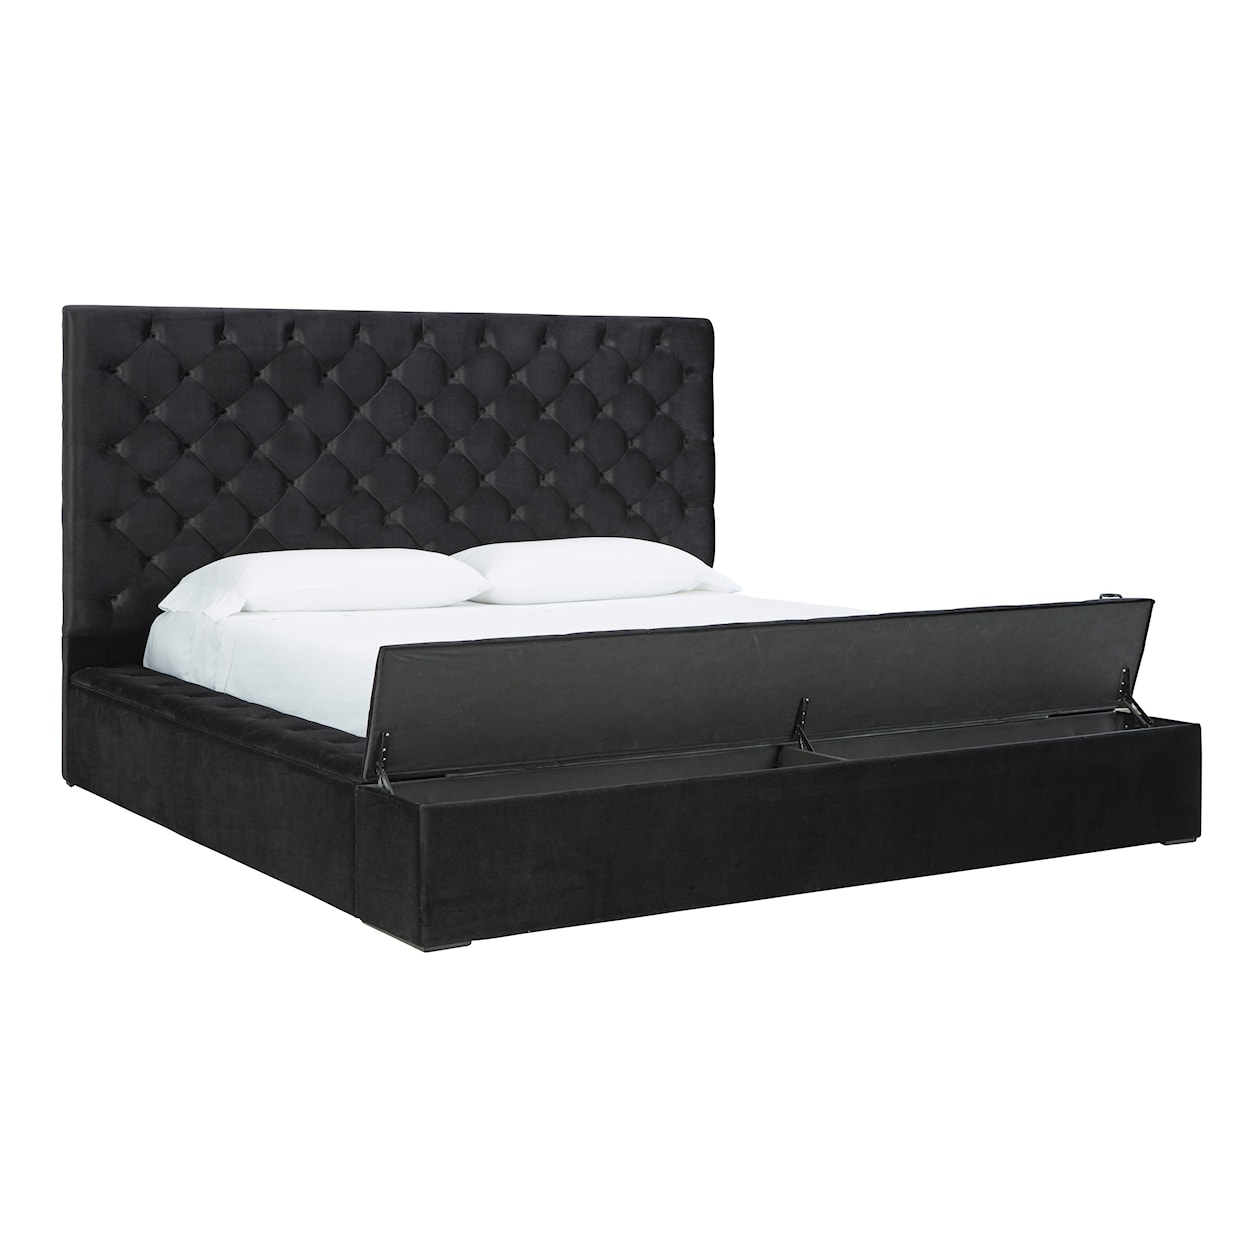 Signature Design by Ashley Lindenfield King Uph Bed with Storage